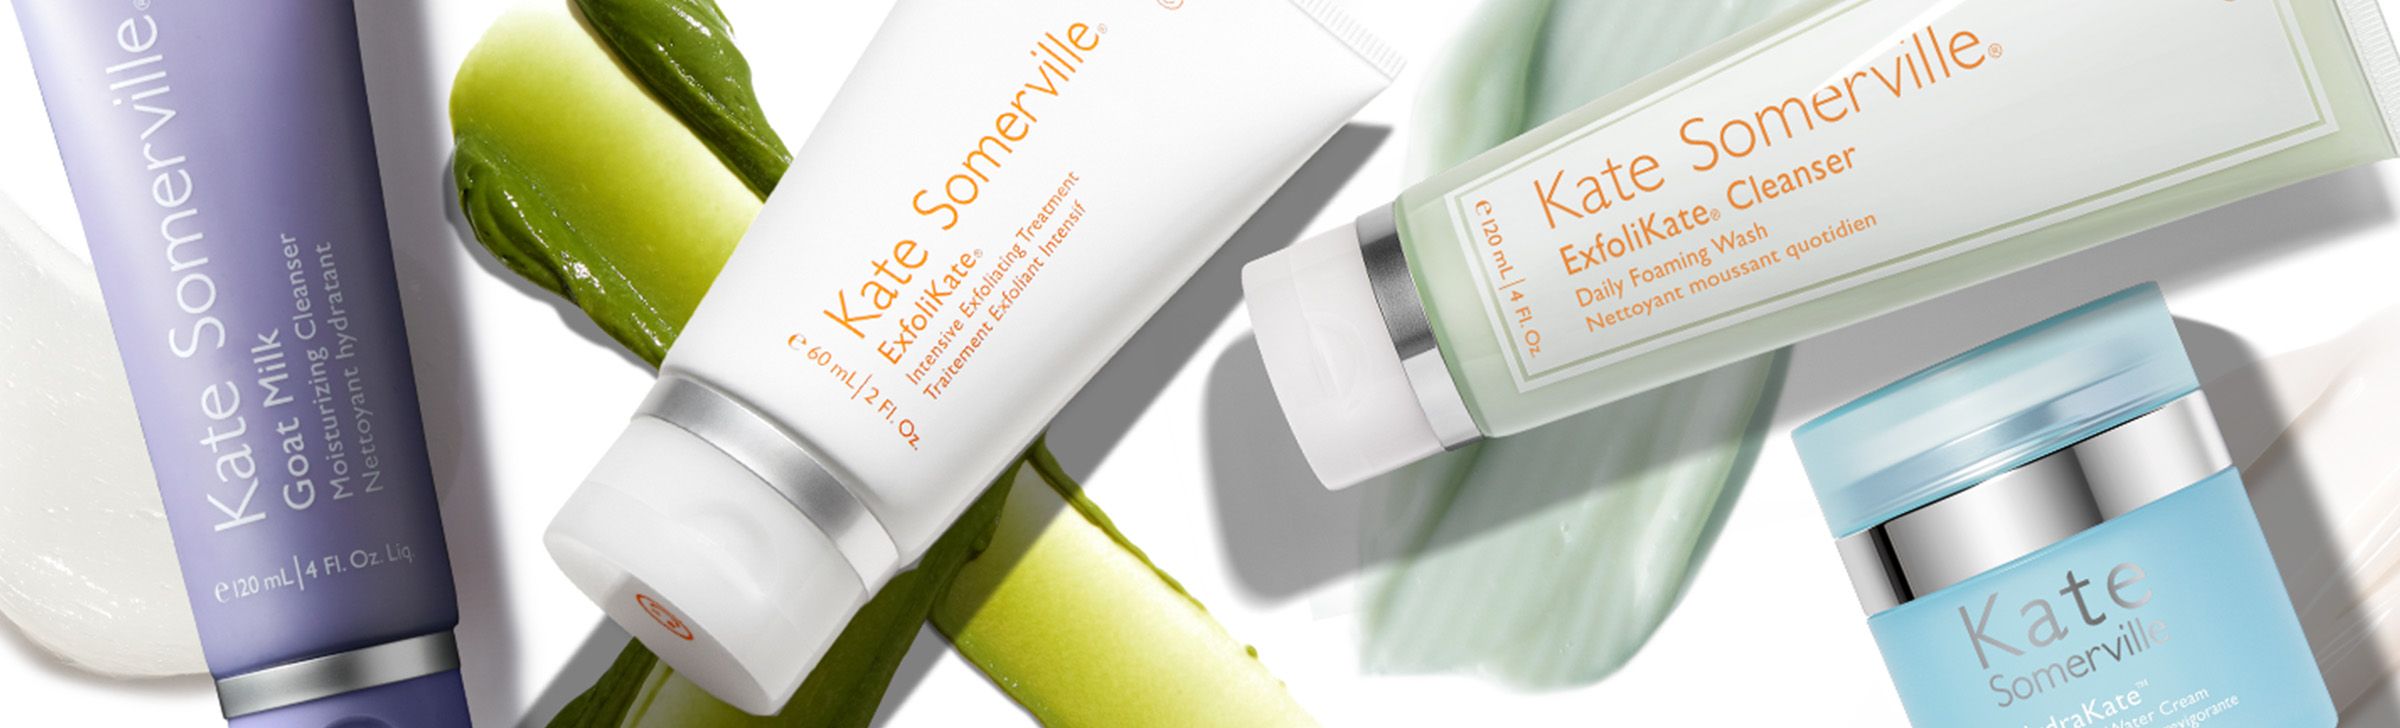 kate somervile brand beauty products